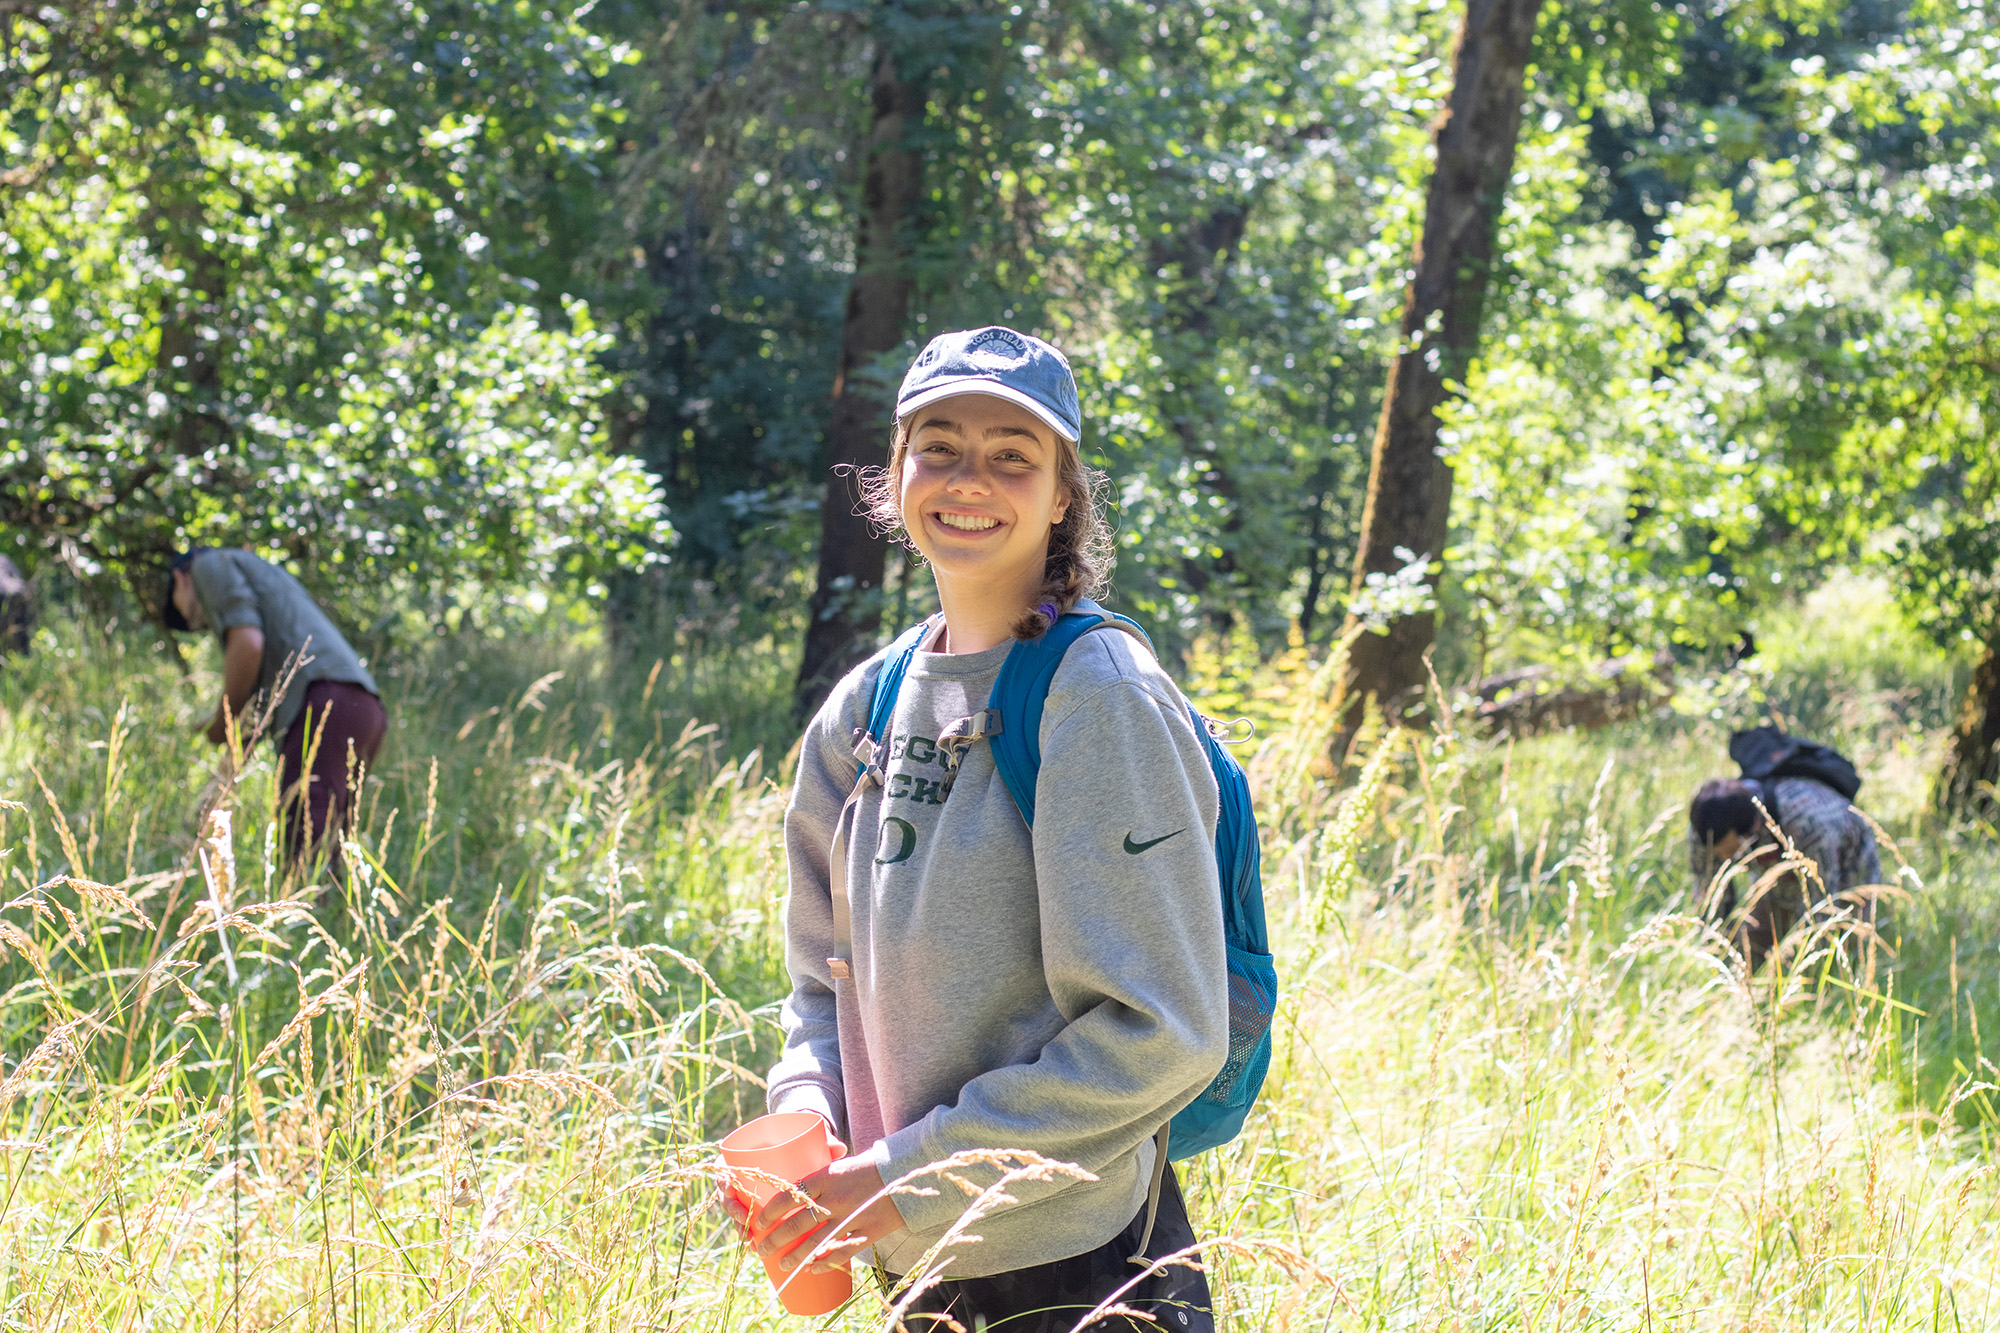 Greater Yamhill Watershed Council volunteers